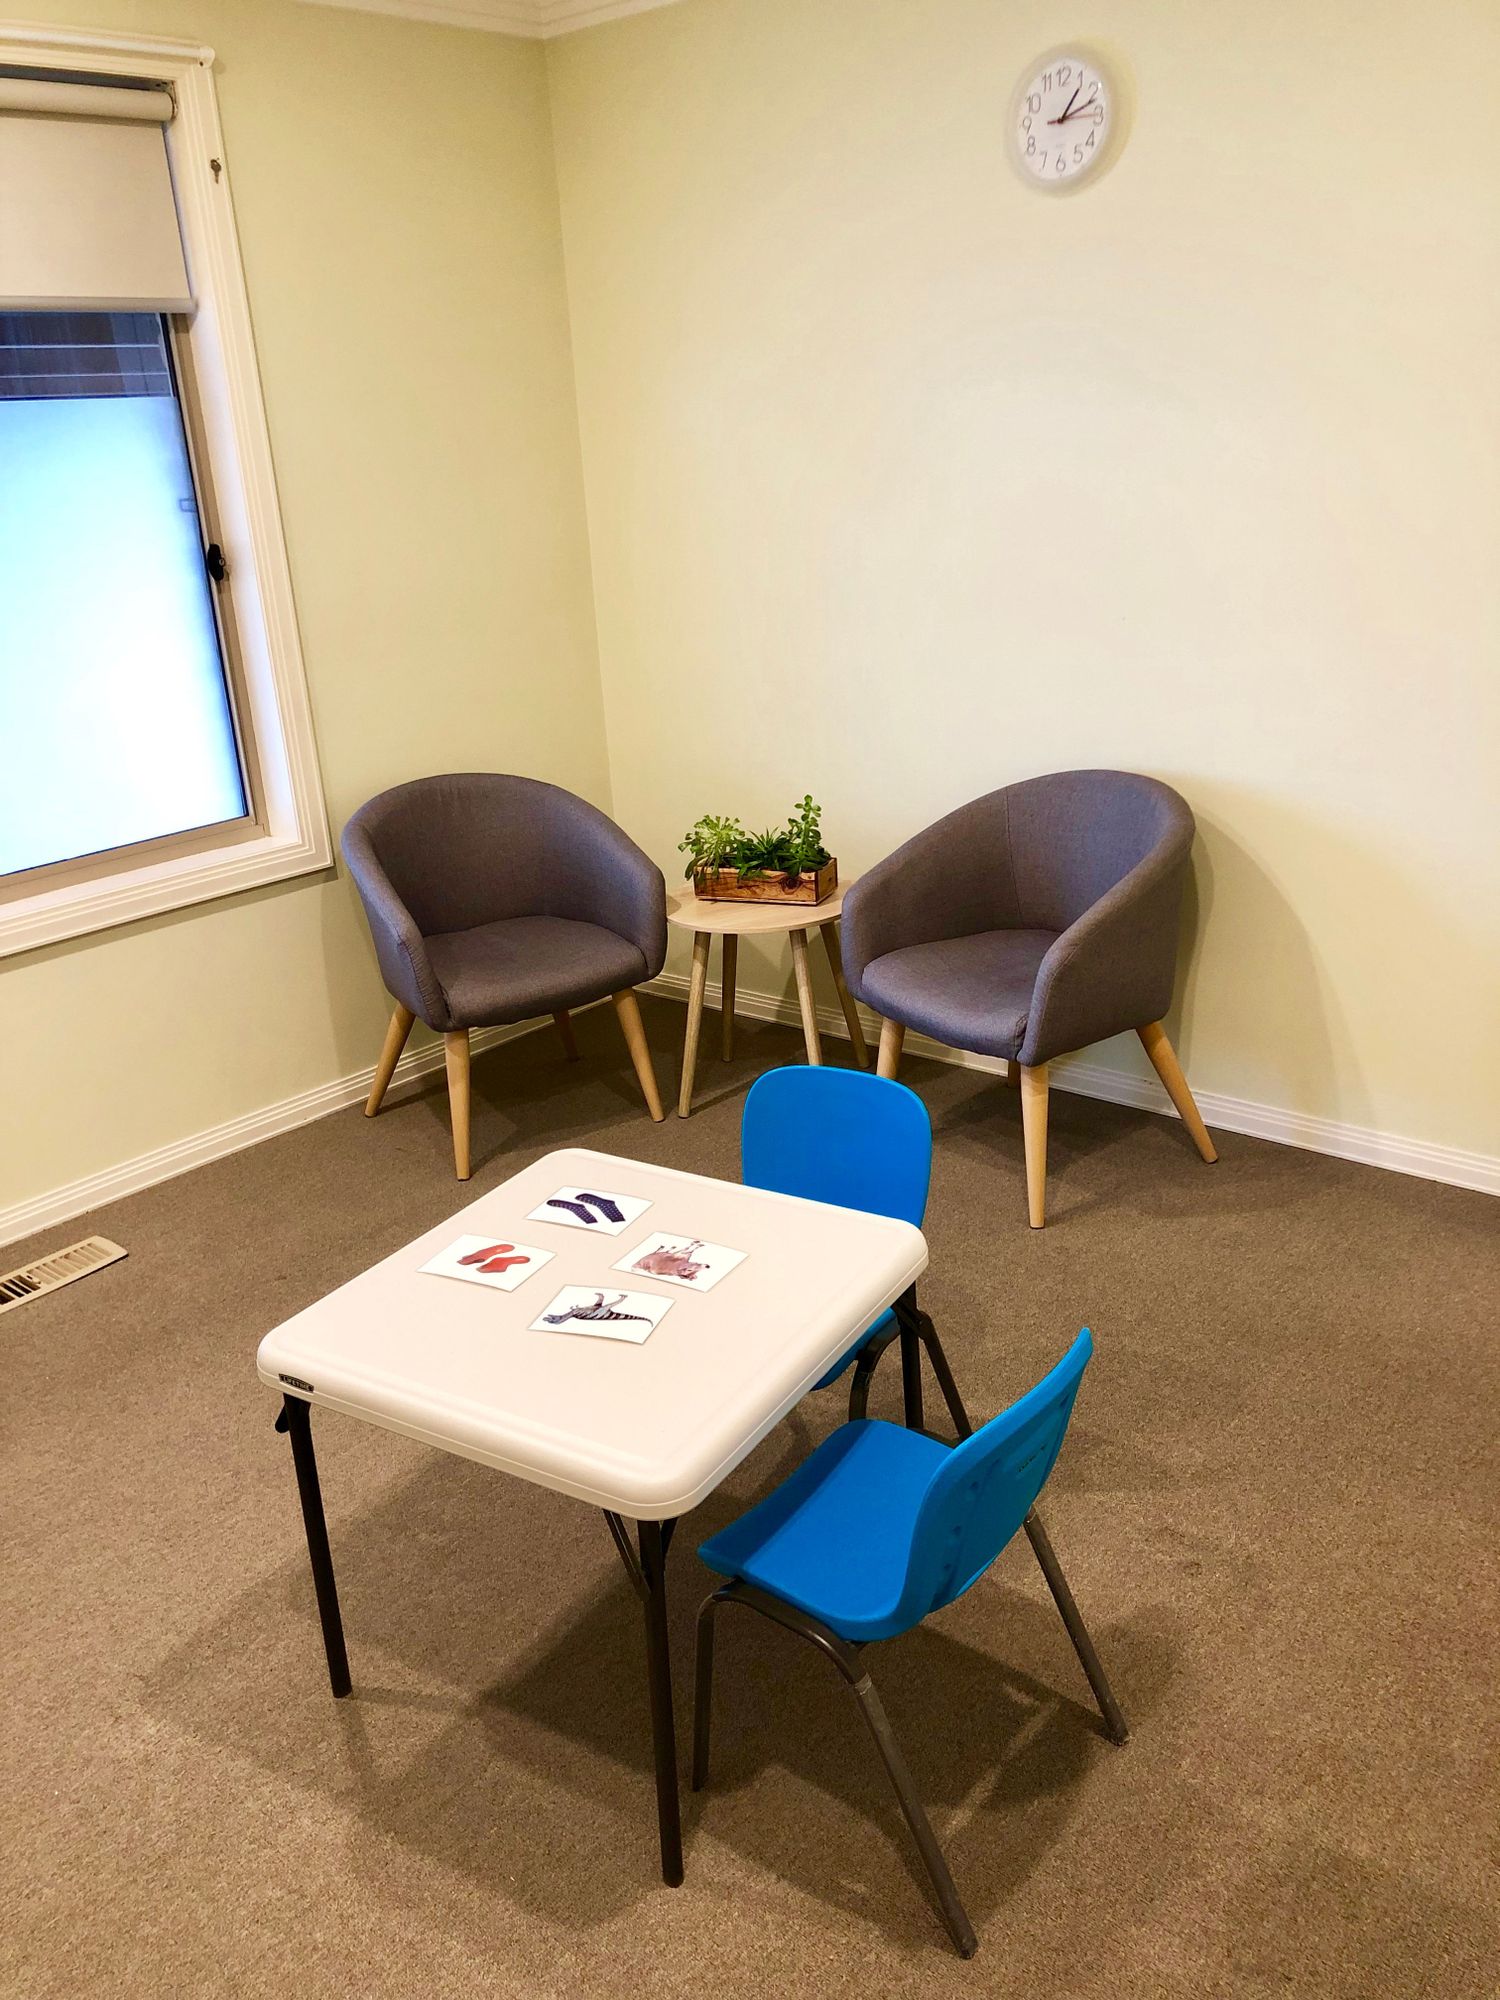 Gallery Photo of Therapy and Assessment Consultation room